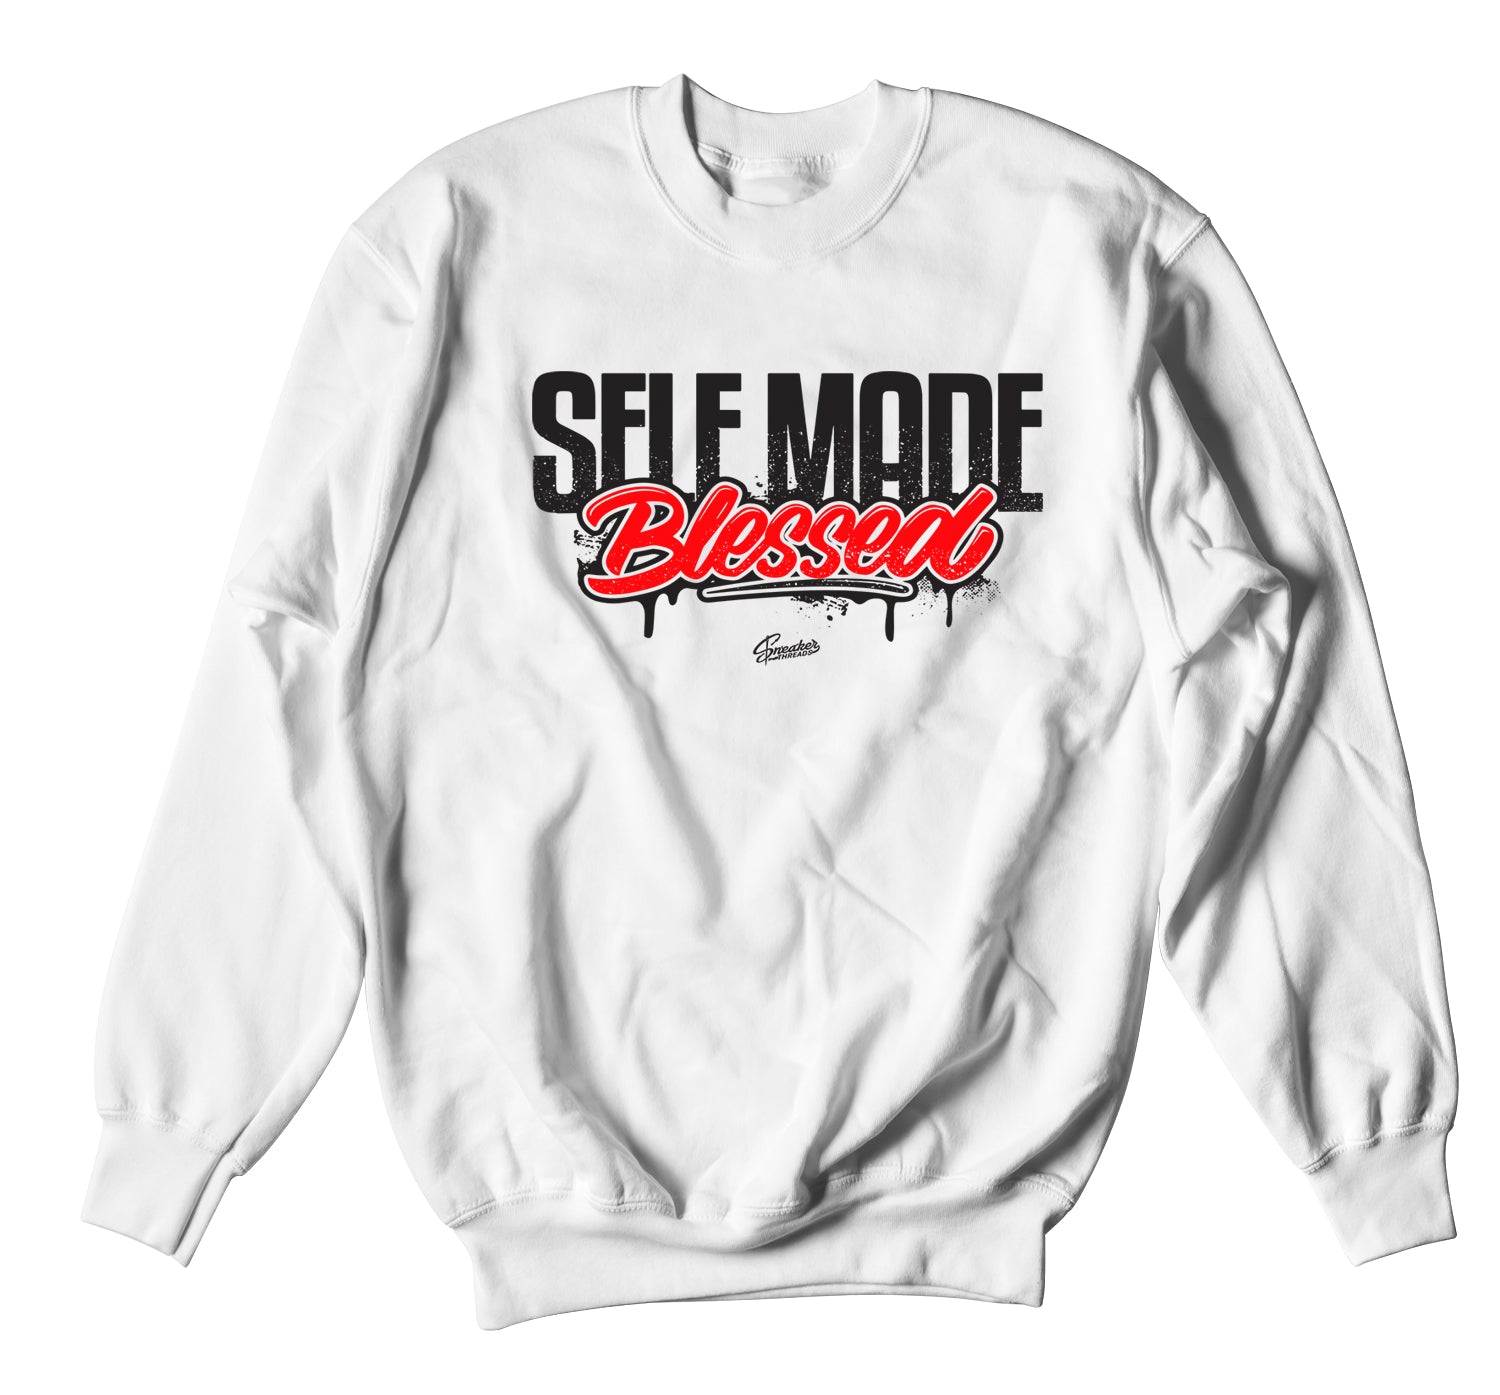 crewneck for men made to match with the foamposite